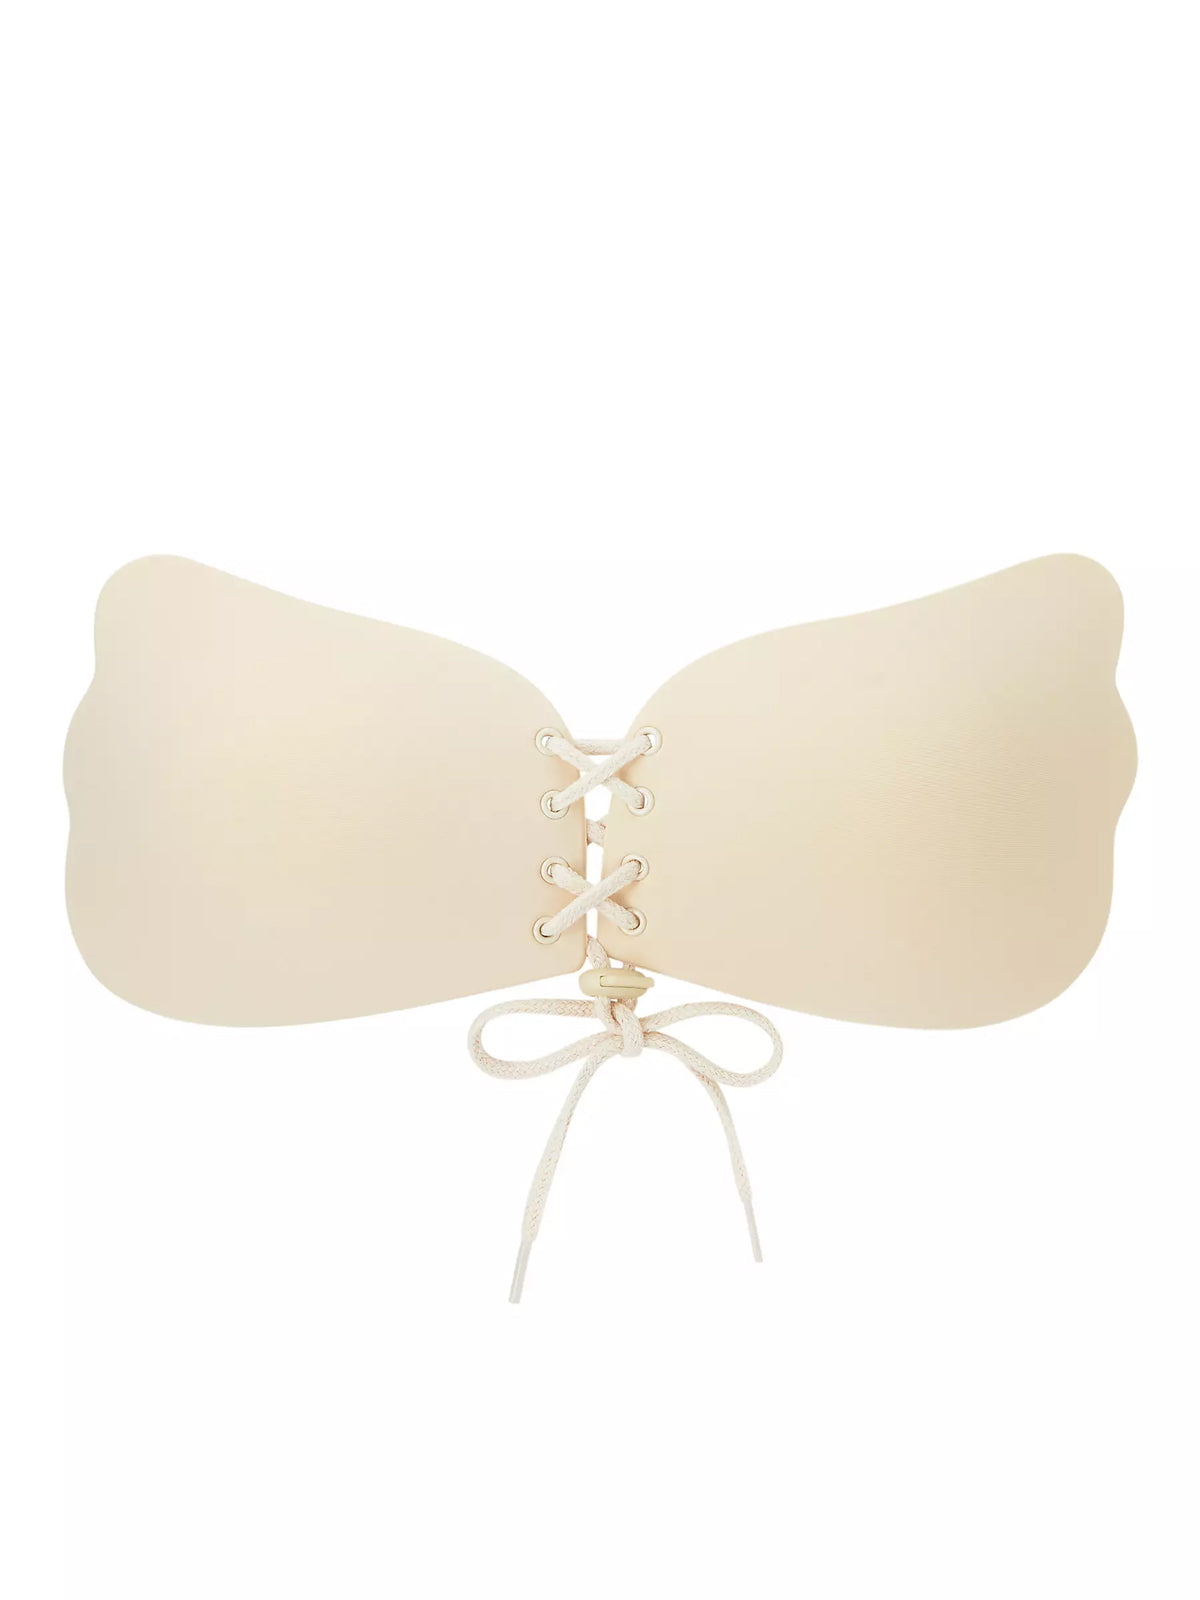 Midnightdivas - Invisible Push Up Bra <3 Most women find backless